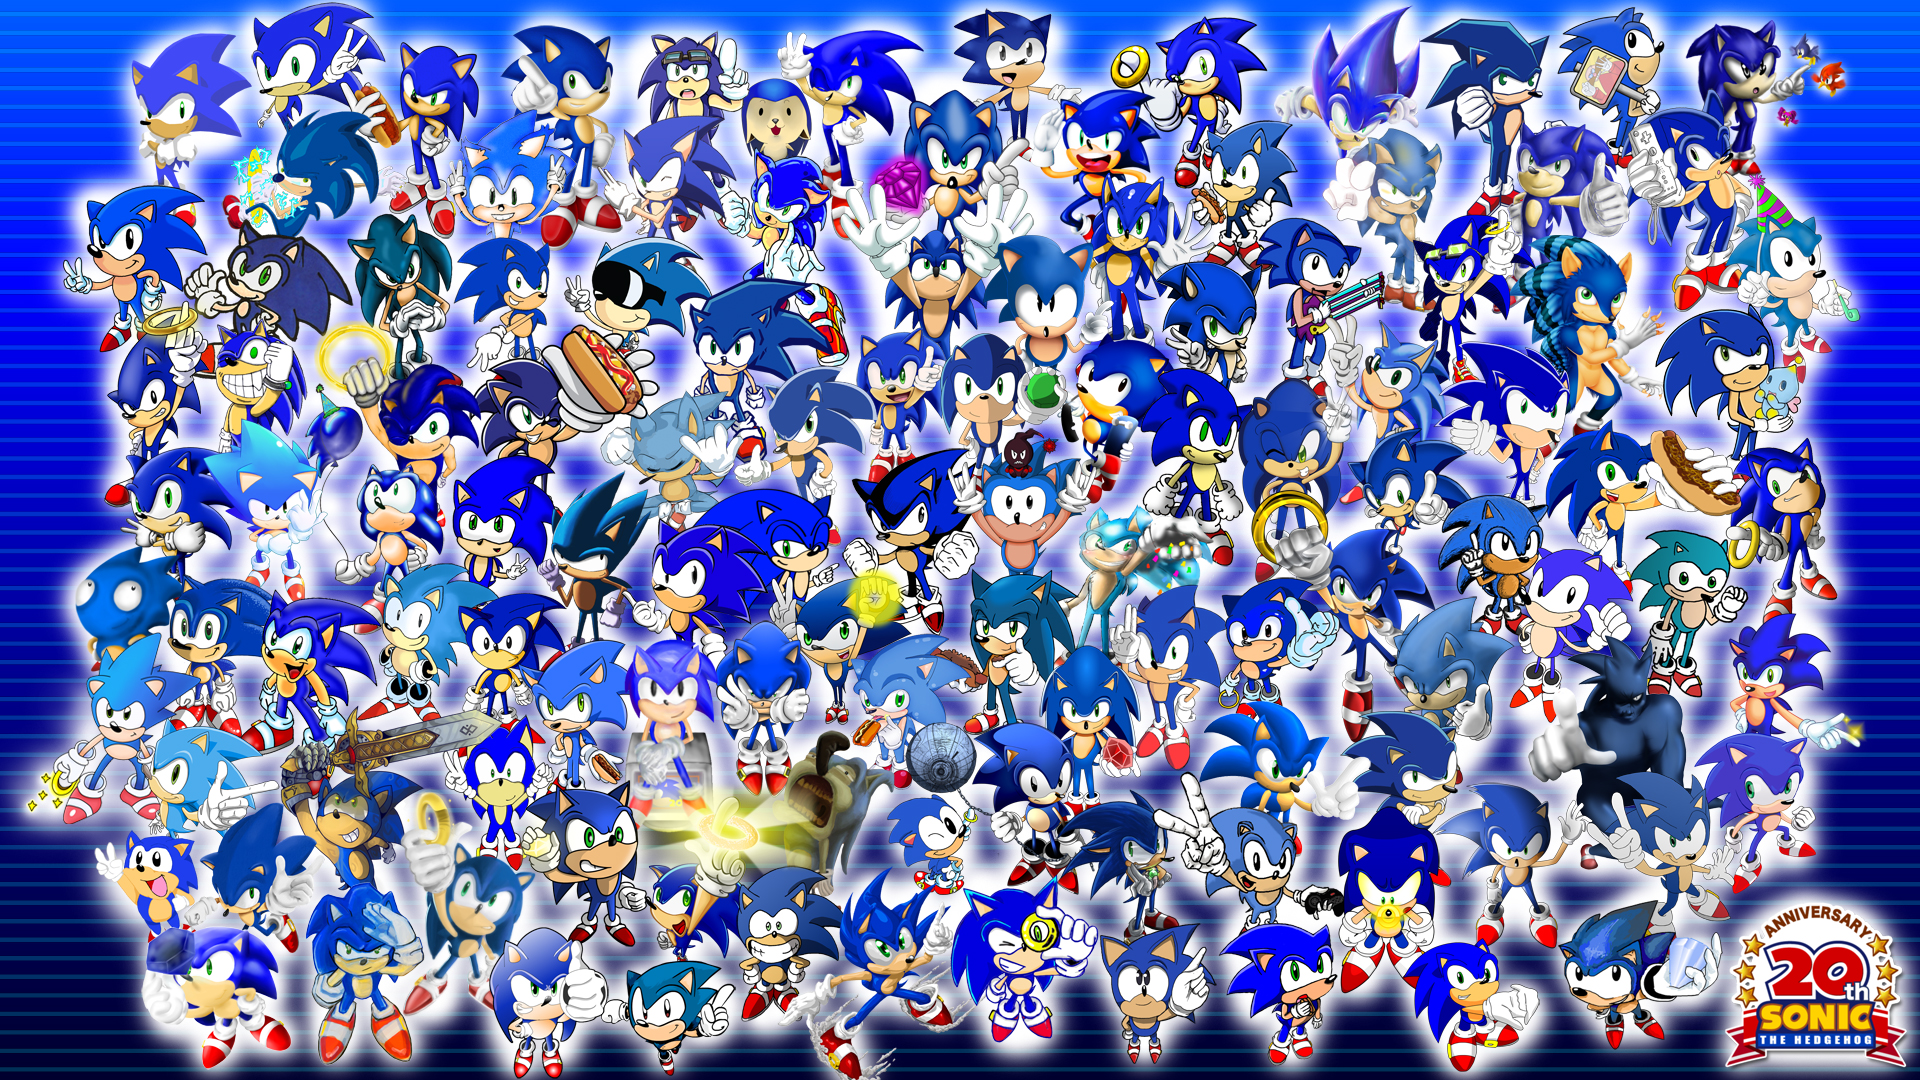 Project Sonic Wallpaper By Thewax